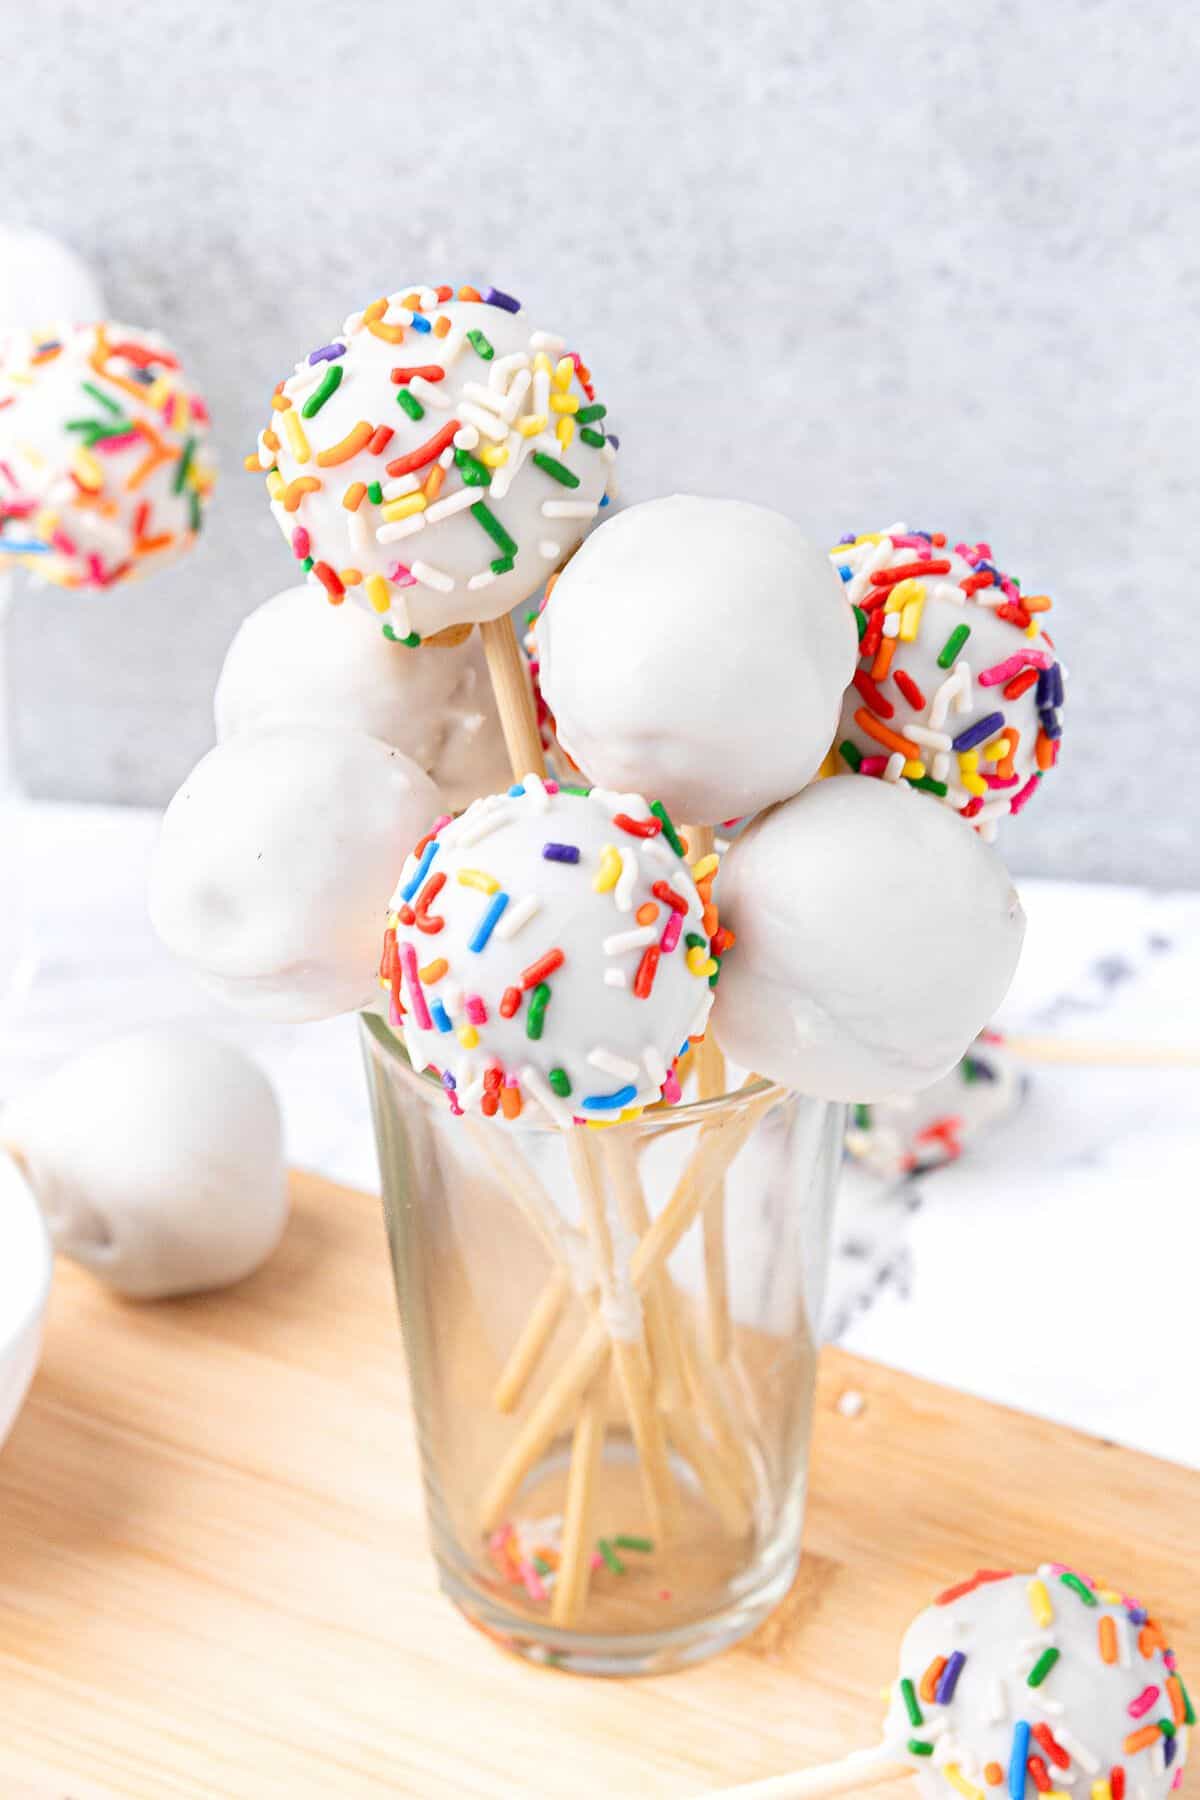 Starbucks copycat cake pops in a glass with more cake pops around. Some decorated with colored sprinkles.